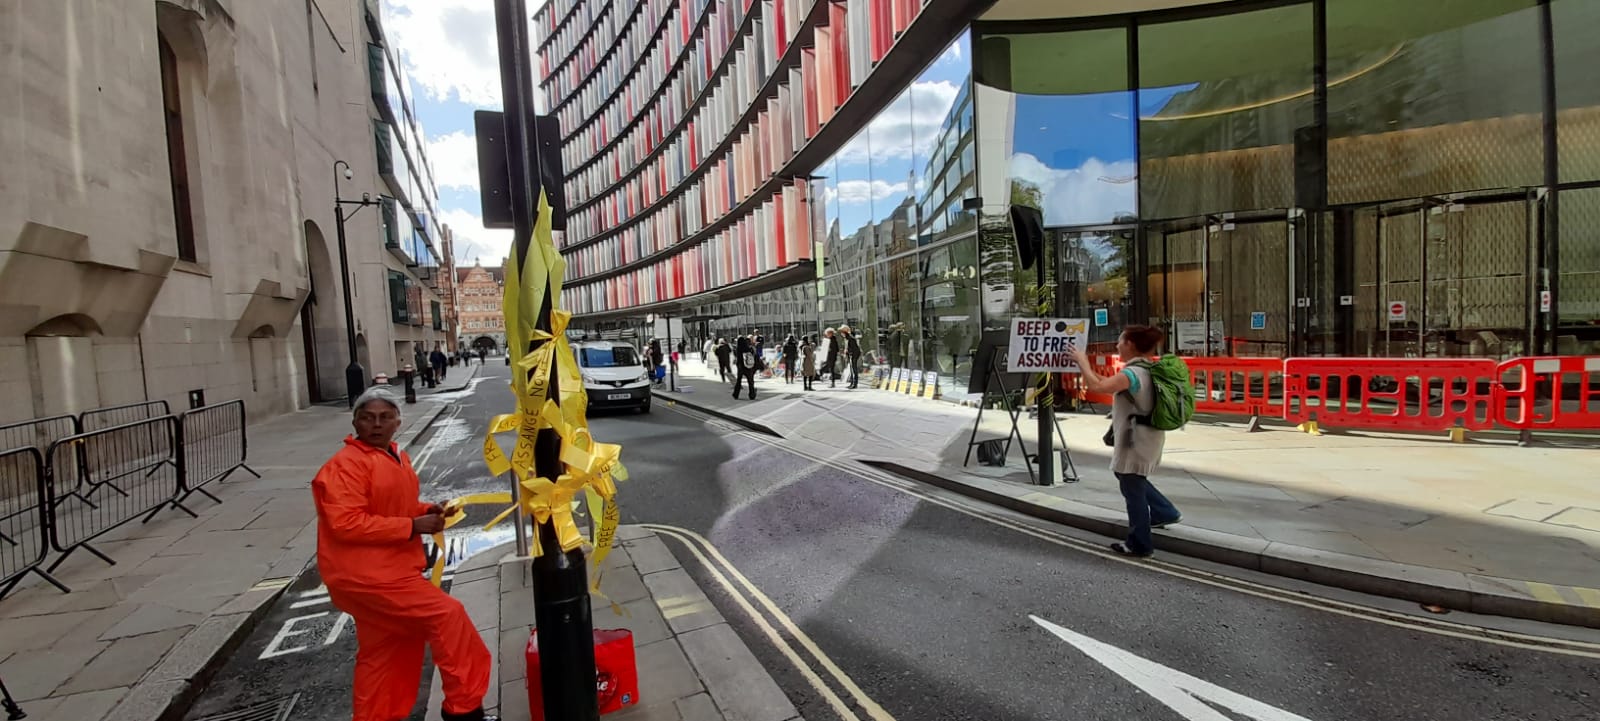 protest_photos:yello-ribbons-old-bailey-sept20.jpg